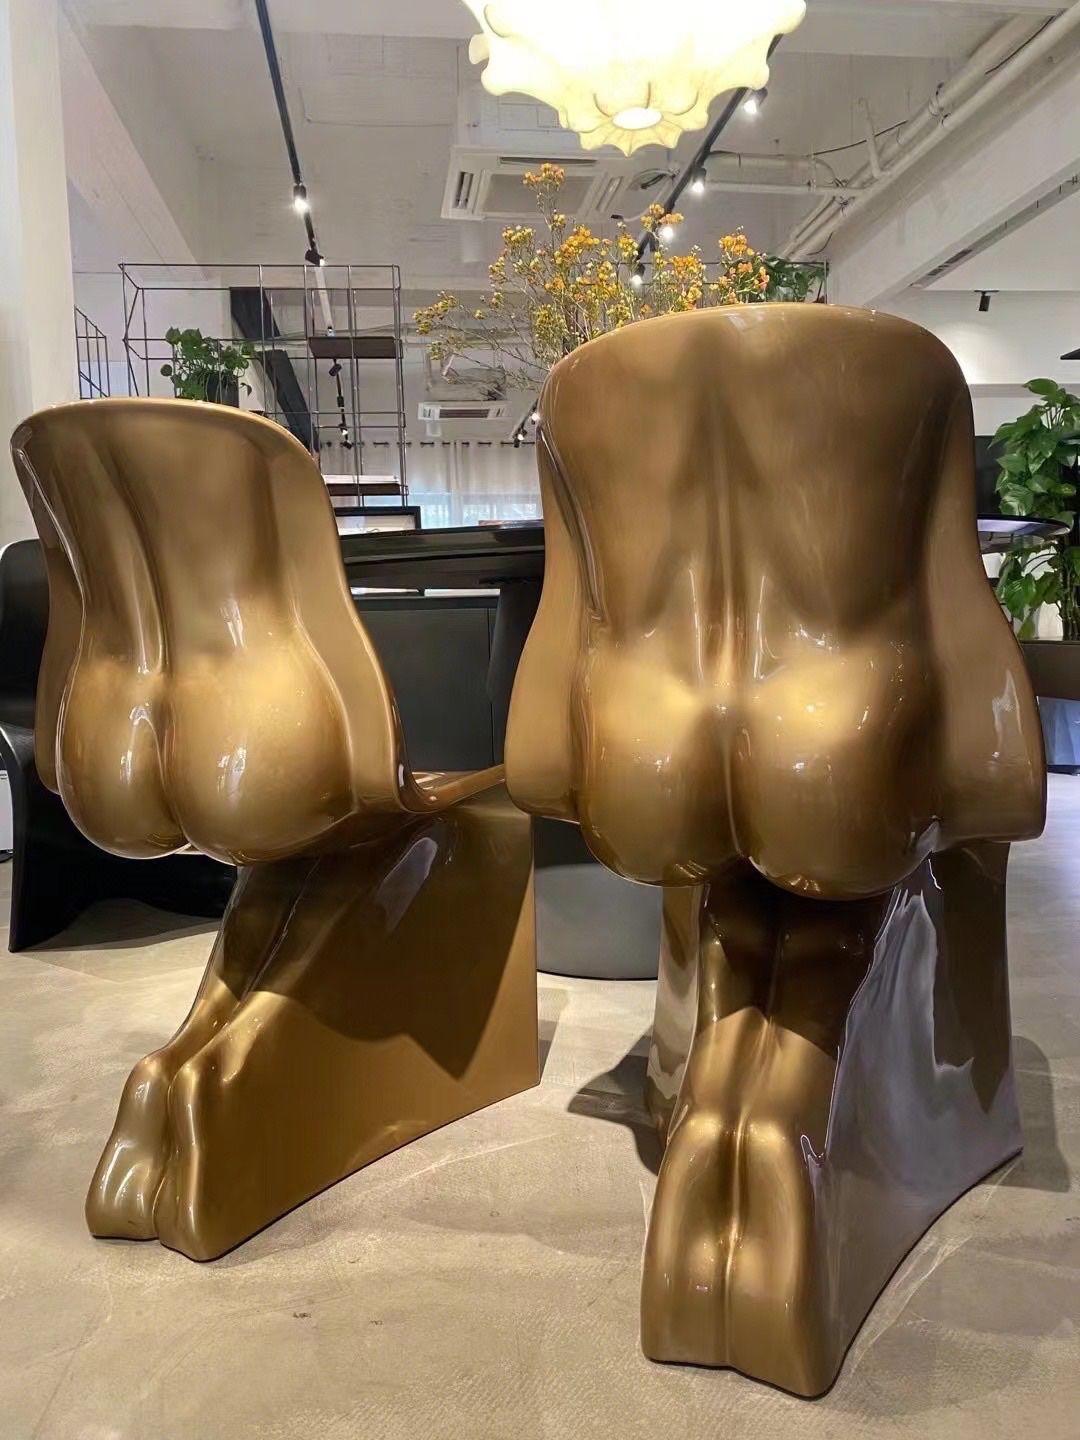 “Him & Her are born directly from the ideas behind the Panton Chair. An evolution of the hermaphroditic original, declined into the harmony of the two sexes. They assume sculpted forms like naked models of seduction but they are not ashamed.” Cit.